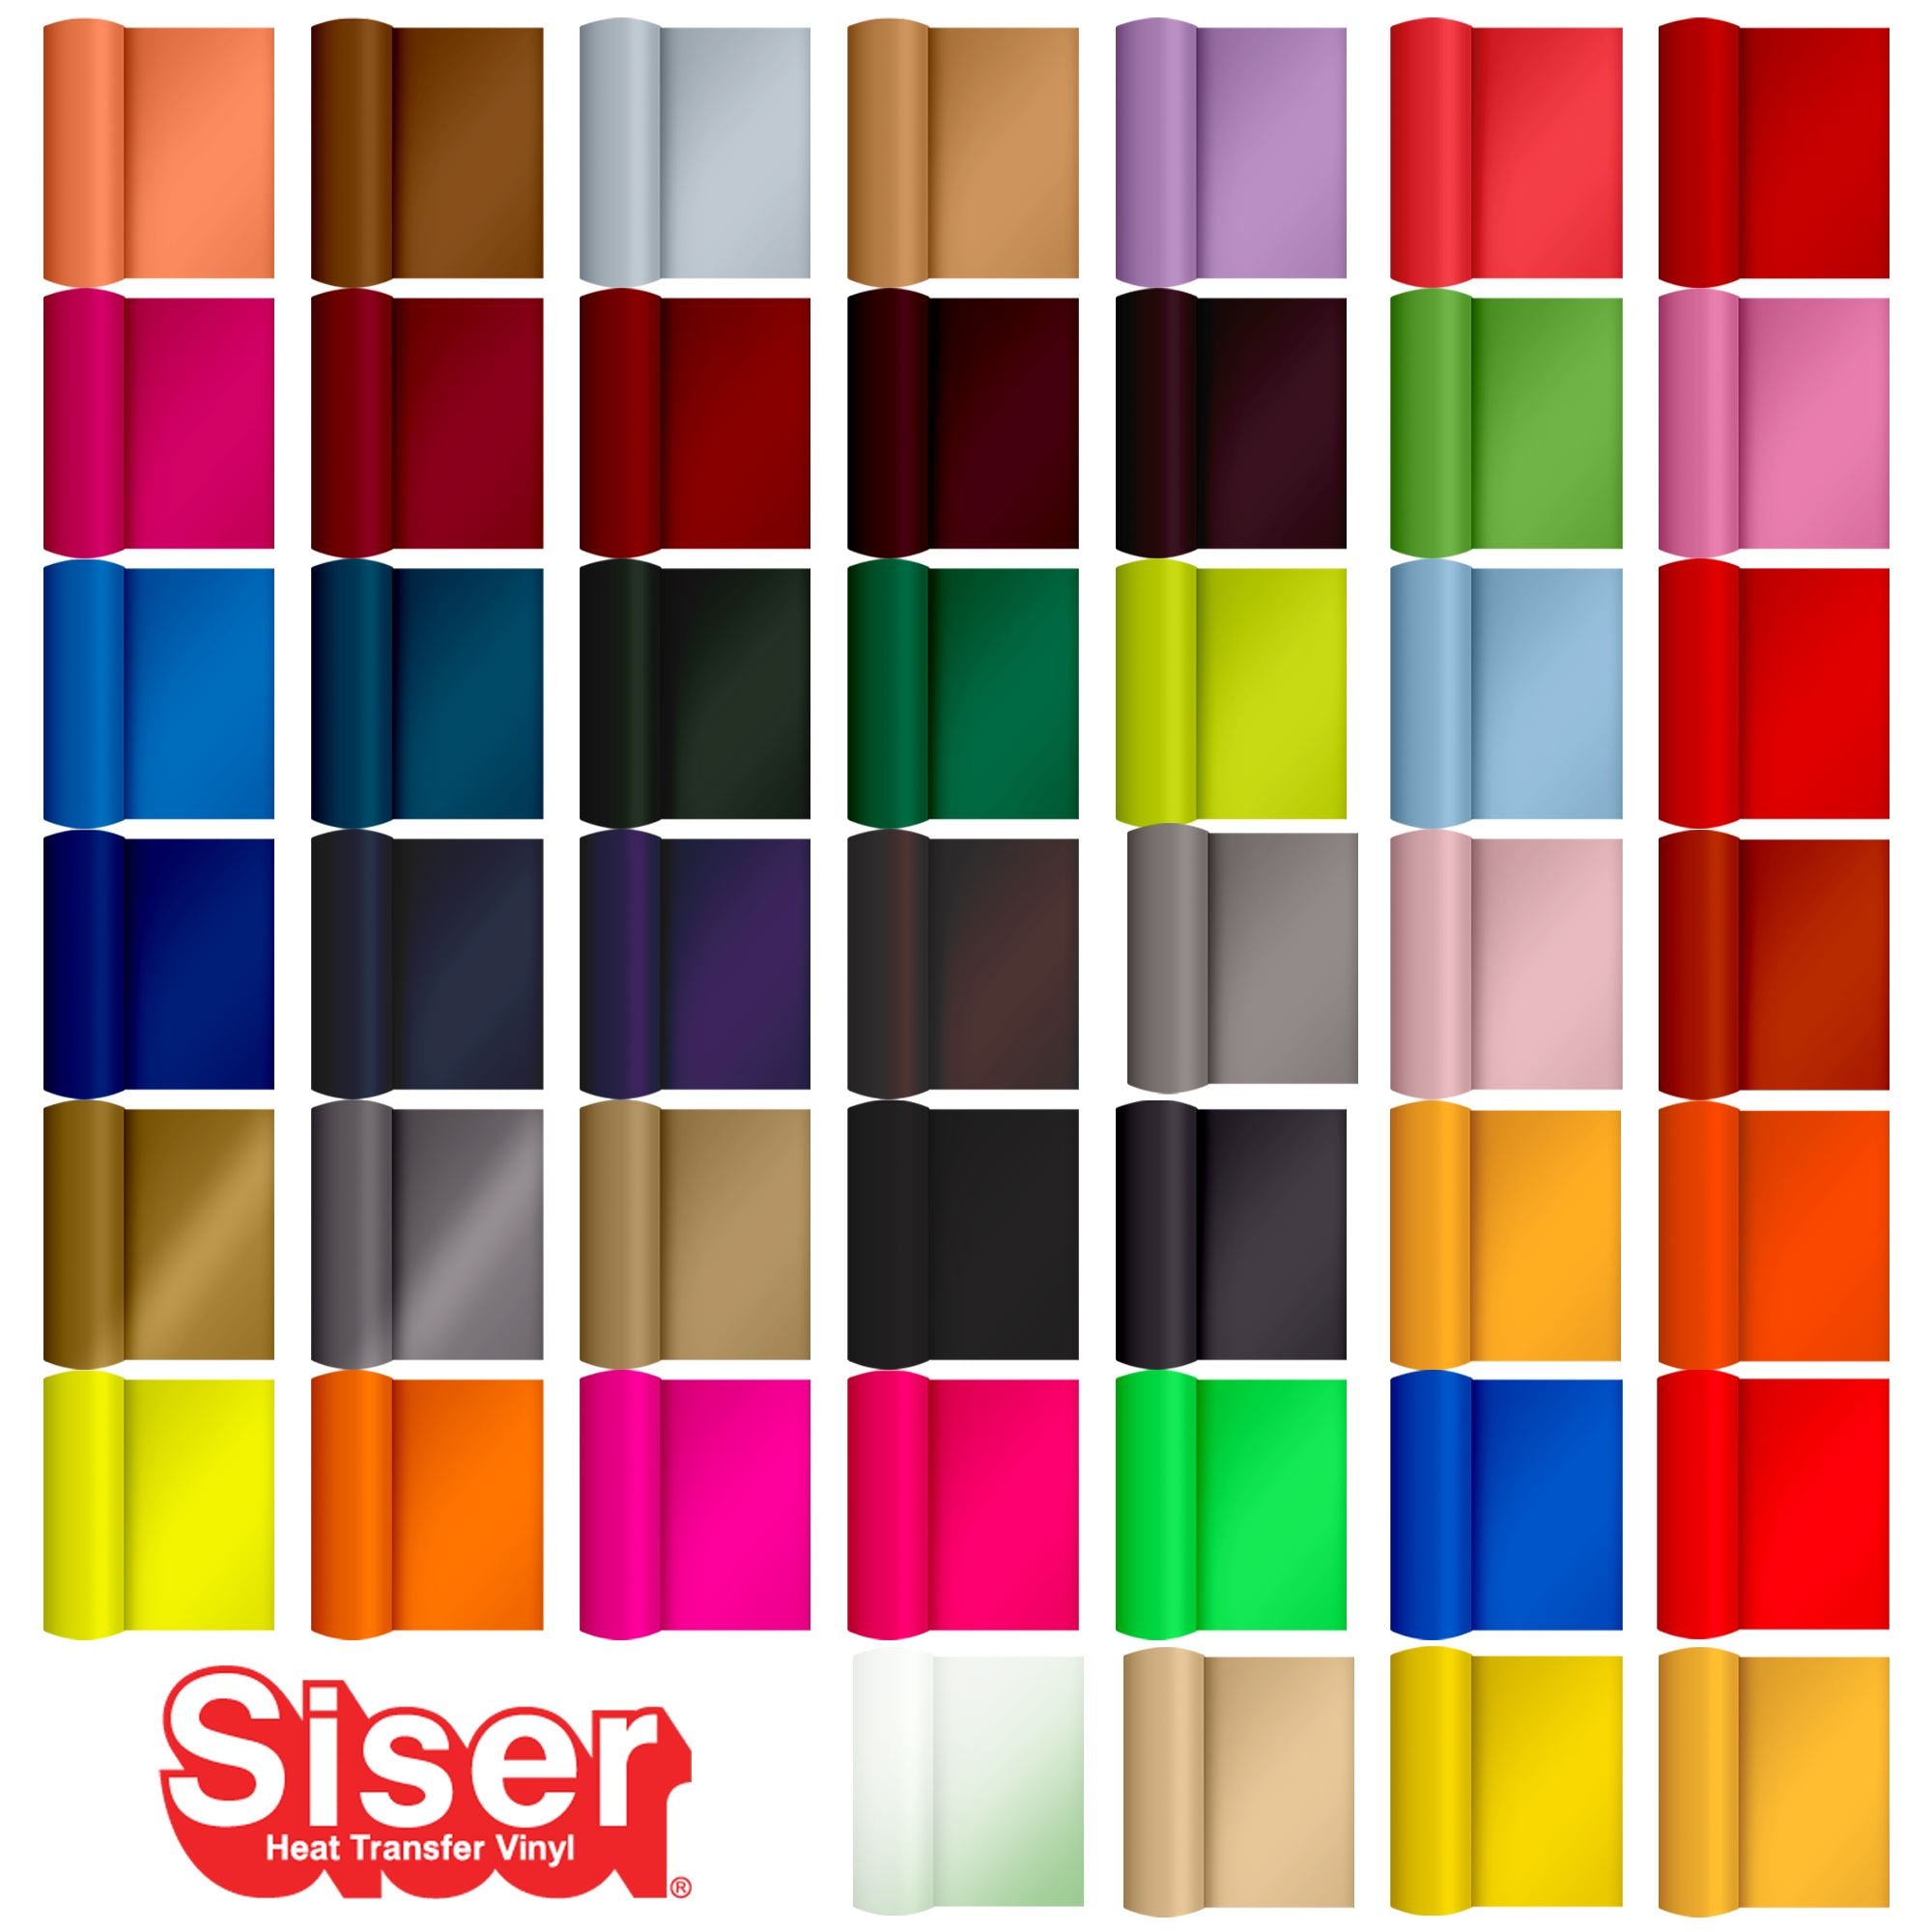 Siser EasyWeed Heat Transfer Vinyl (HTV) 15 x 12 Sheet - 48 Colors Available - Turquoise